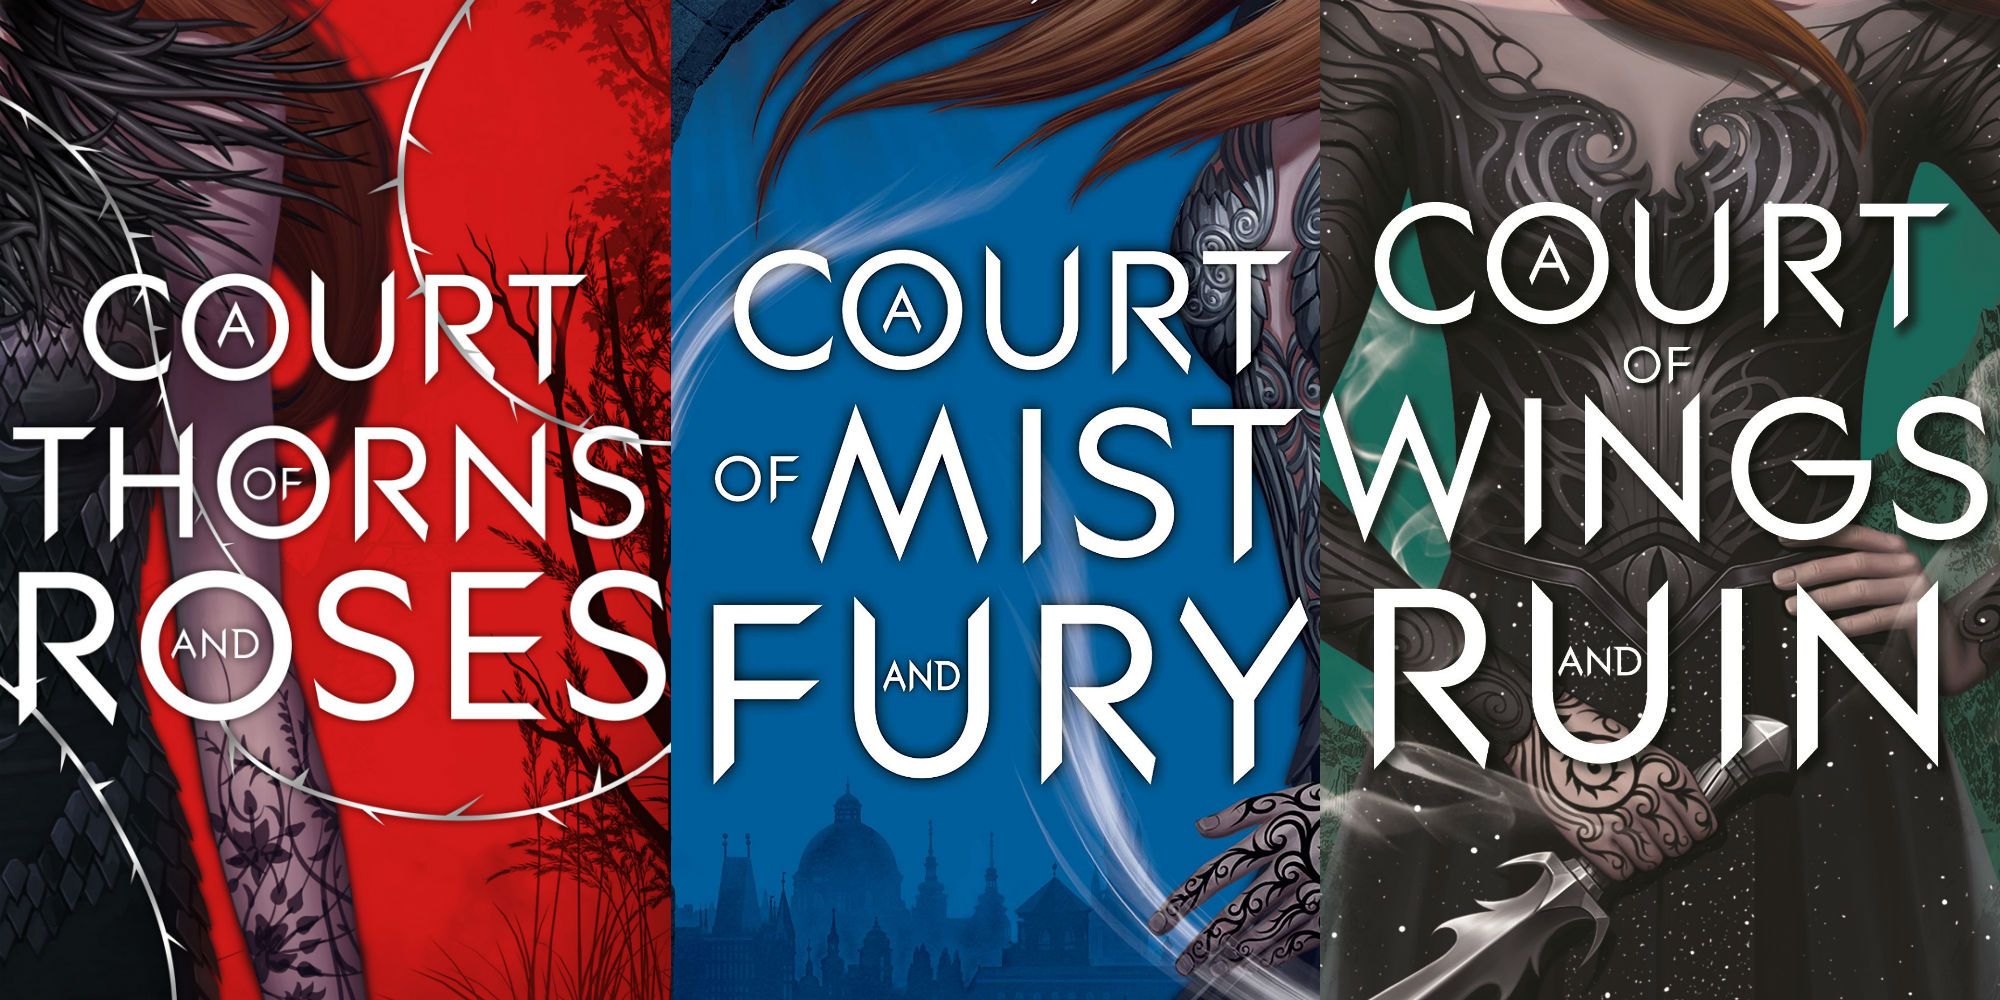 Sarah J Maas A Court Of Thorns And Roses book series